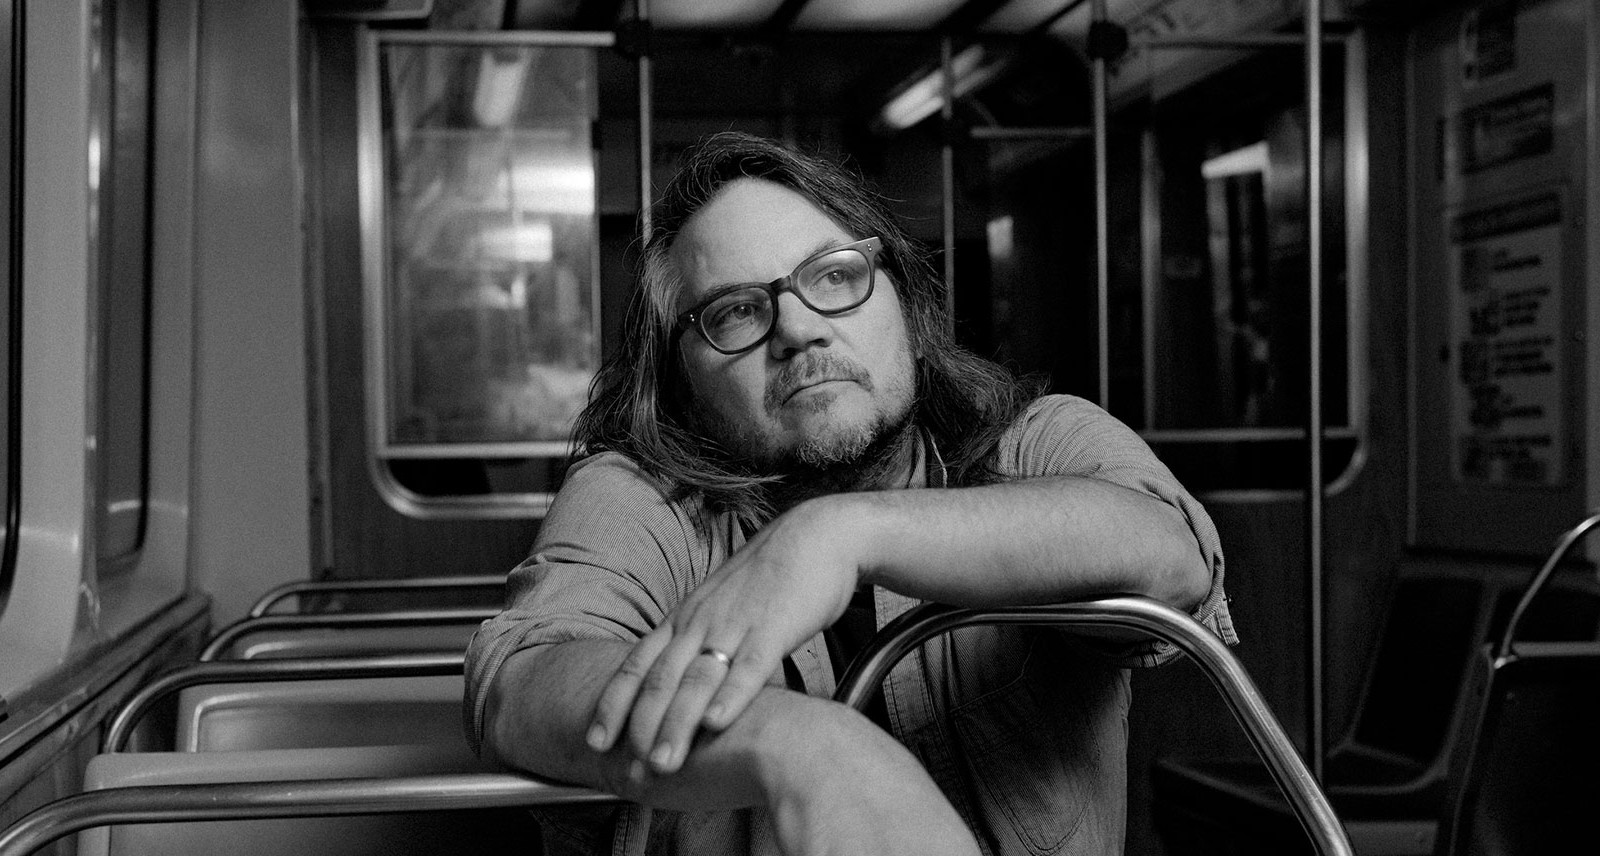 Jeff Tweedy on Addiction, Anxiety, and All the Fans Who Wish He'd Do Drugs Again